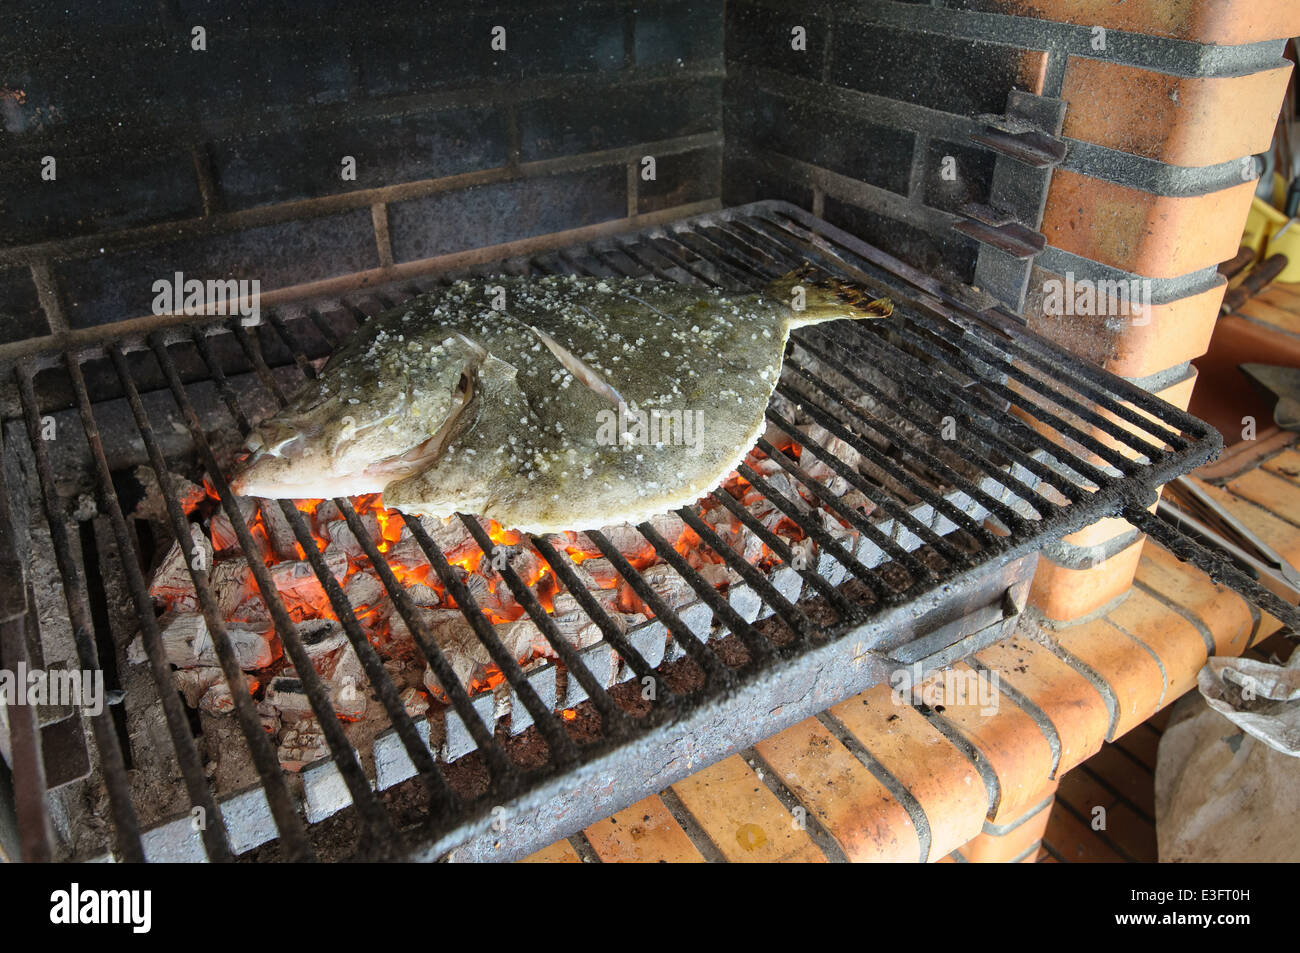 turbot on the grill Stock Photo